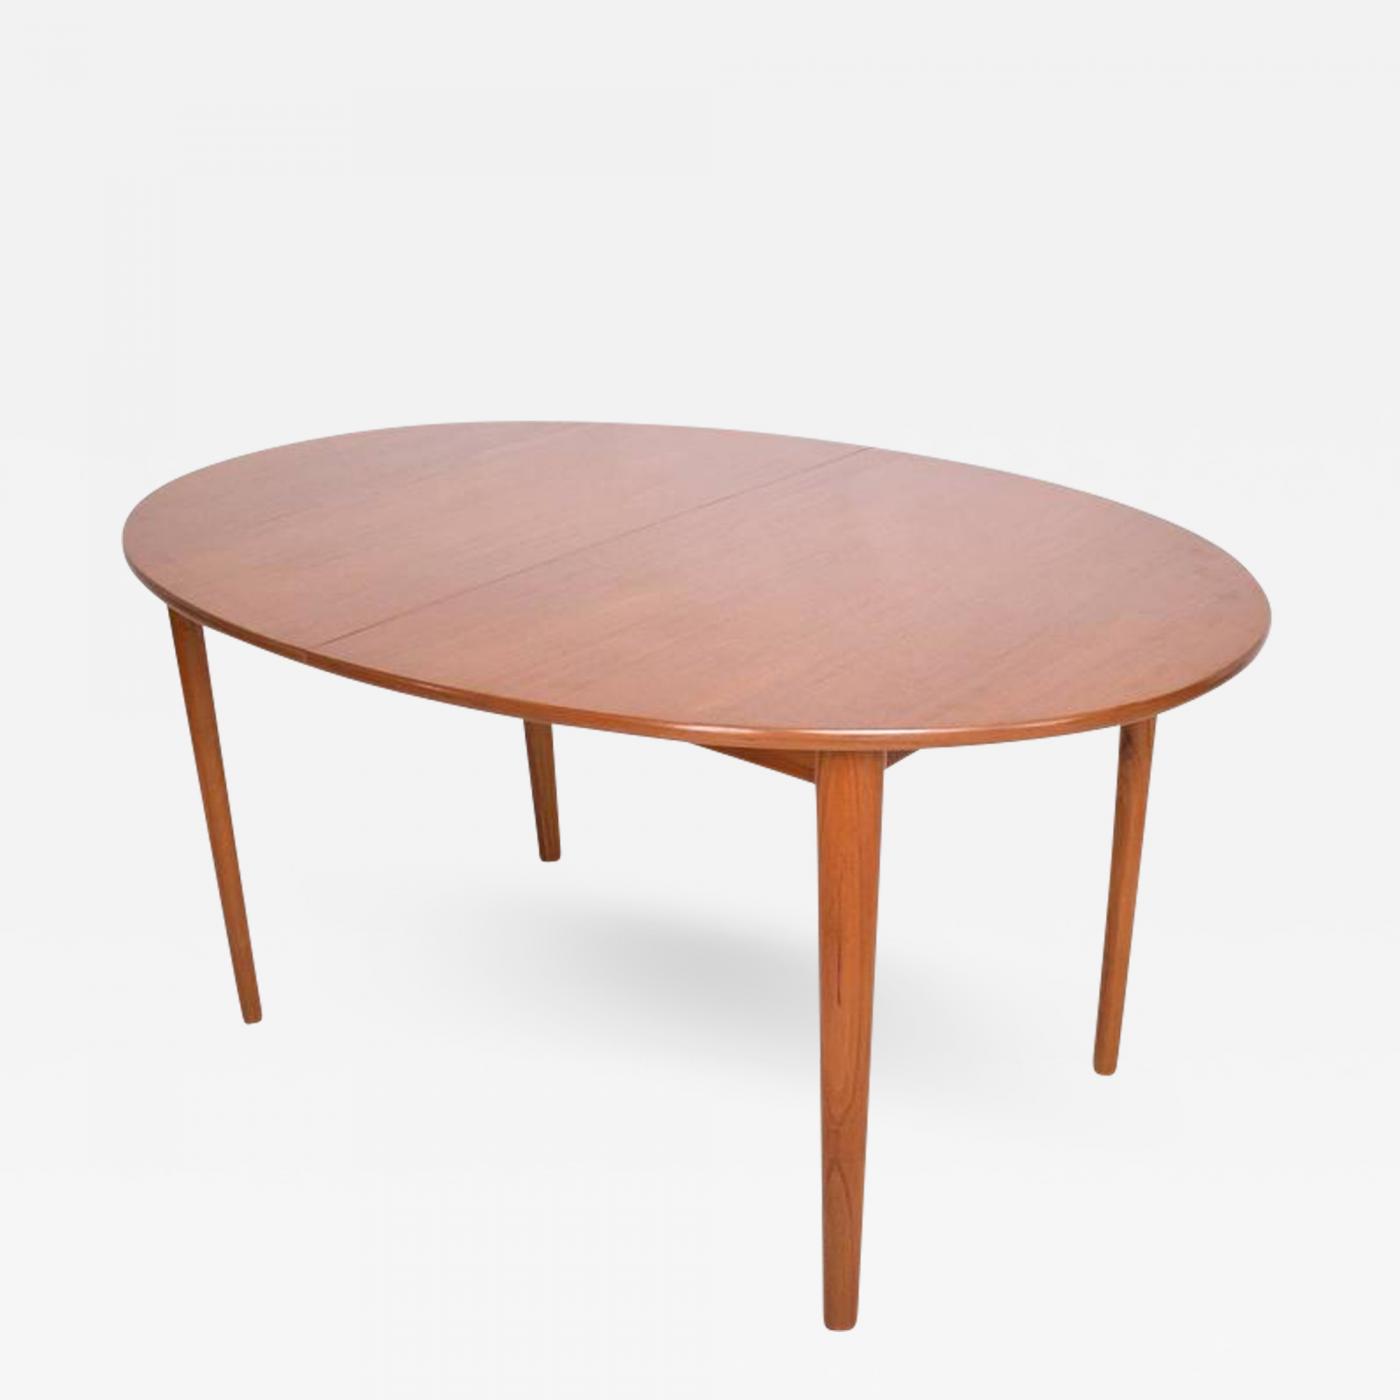 Danish Modern Teak Dining Table Oval Shape With Extensions